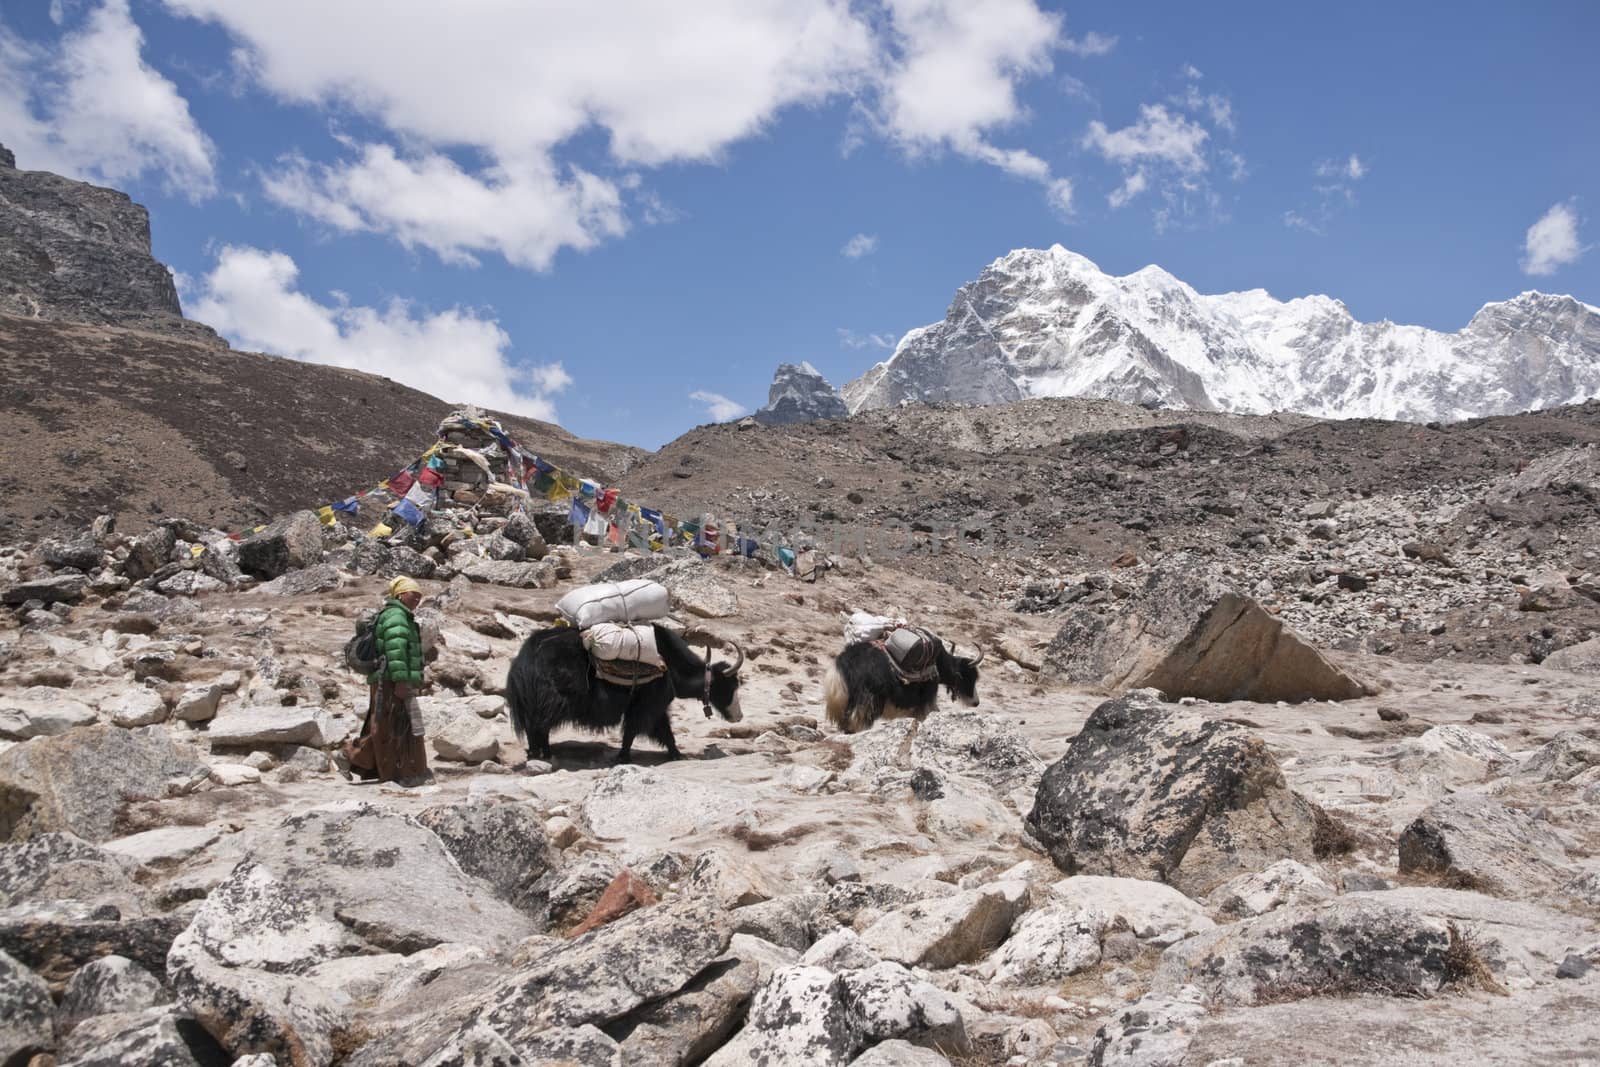 Nepalese woman and yaks loaded with supplies heading through mountain scenery to Everest Base Camp in Nepal.